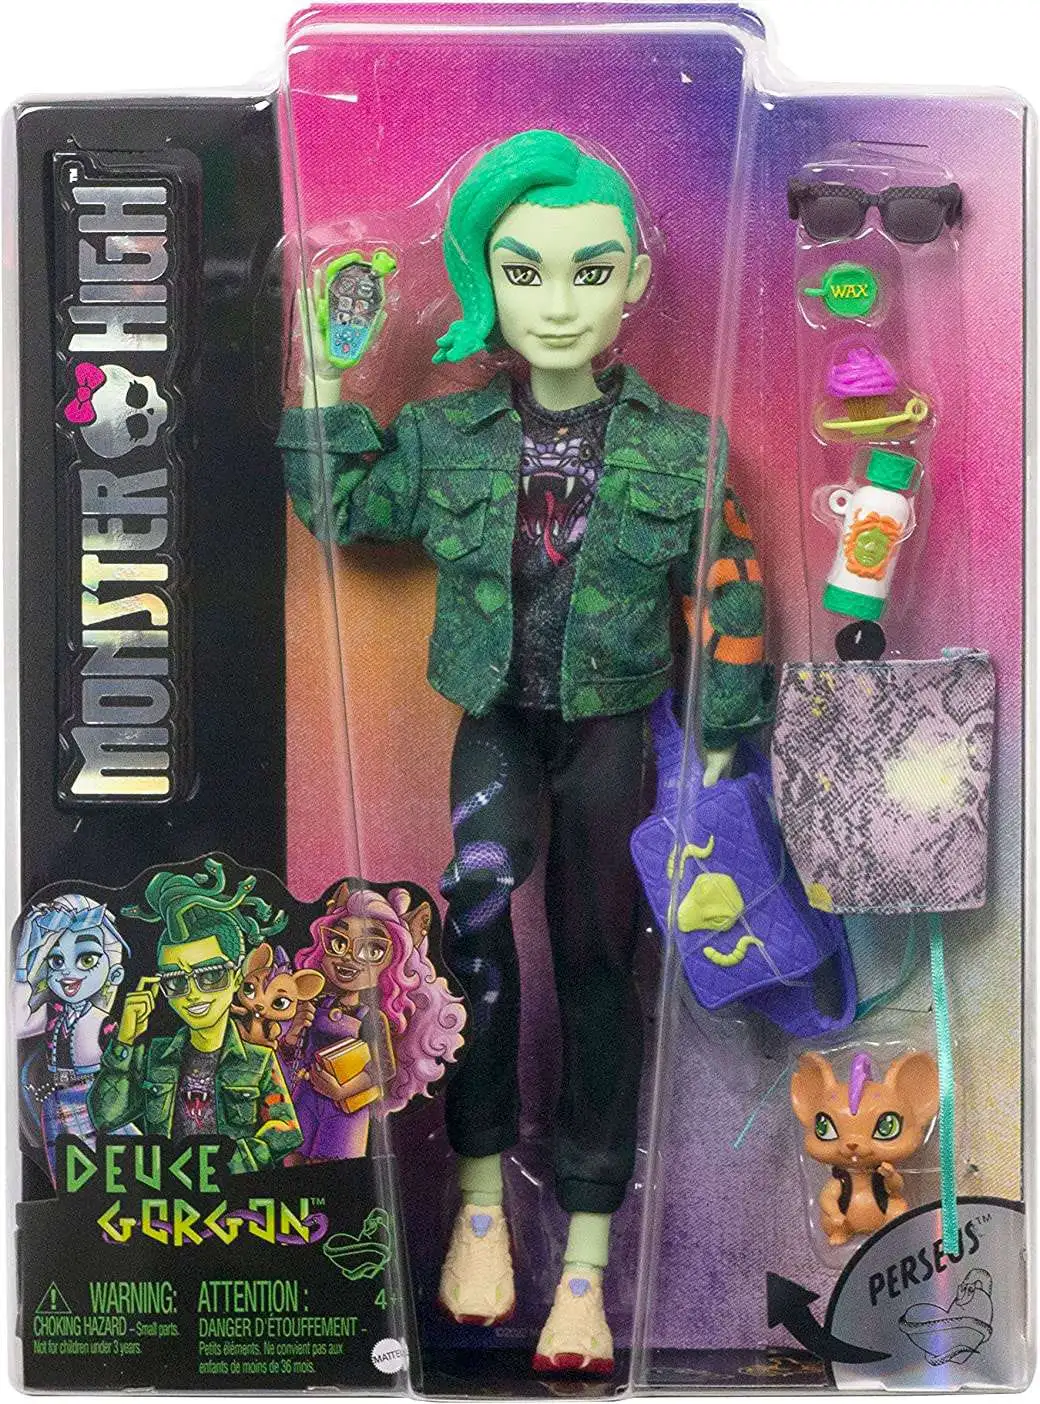 Duce from monster high